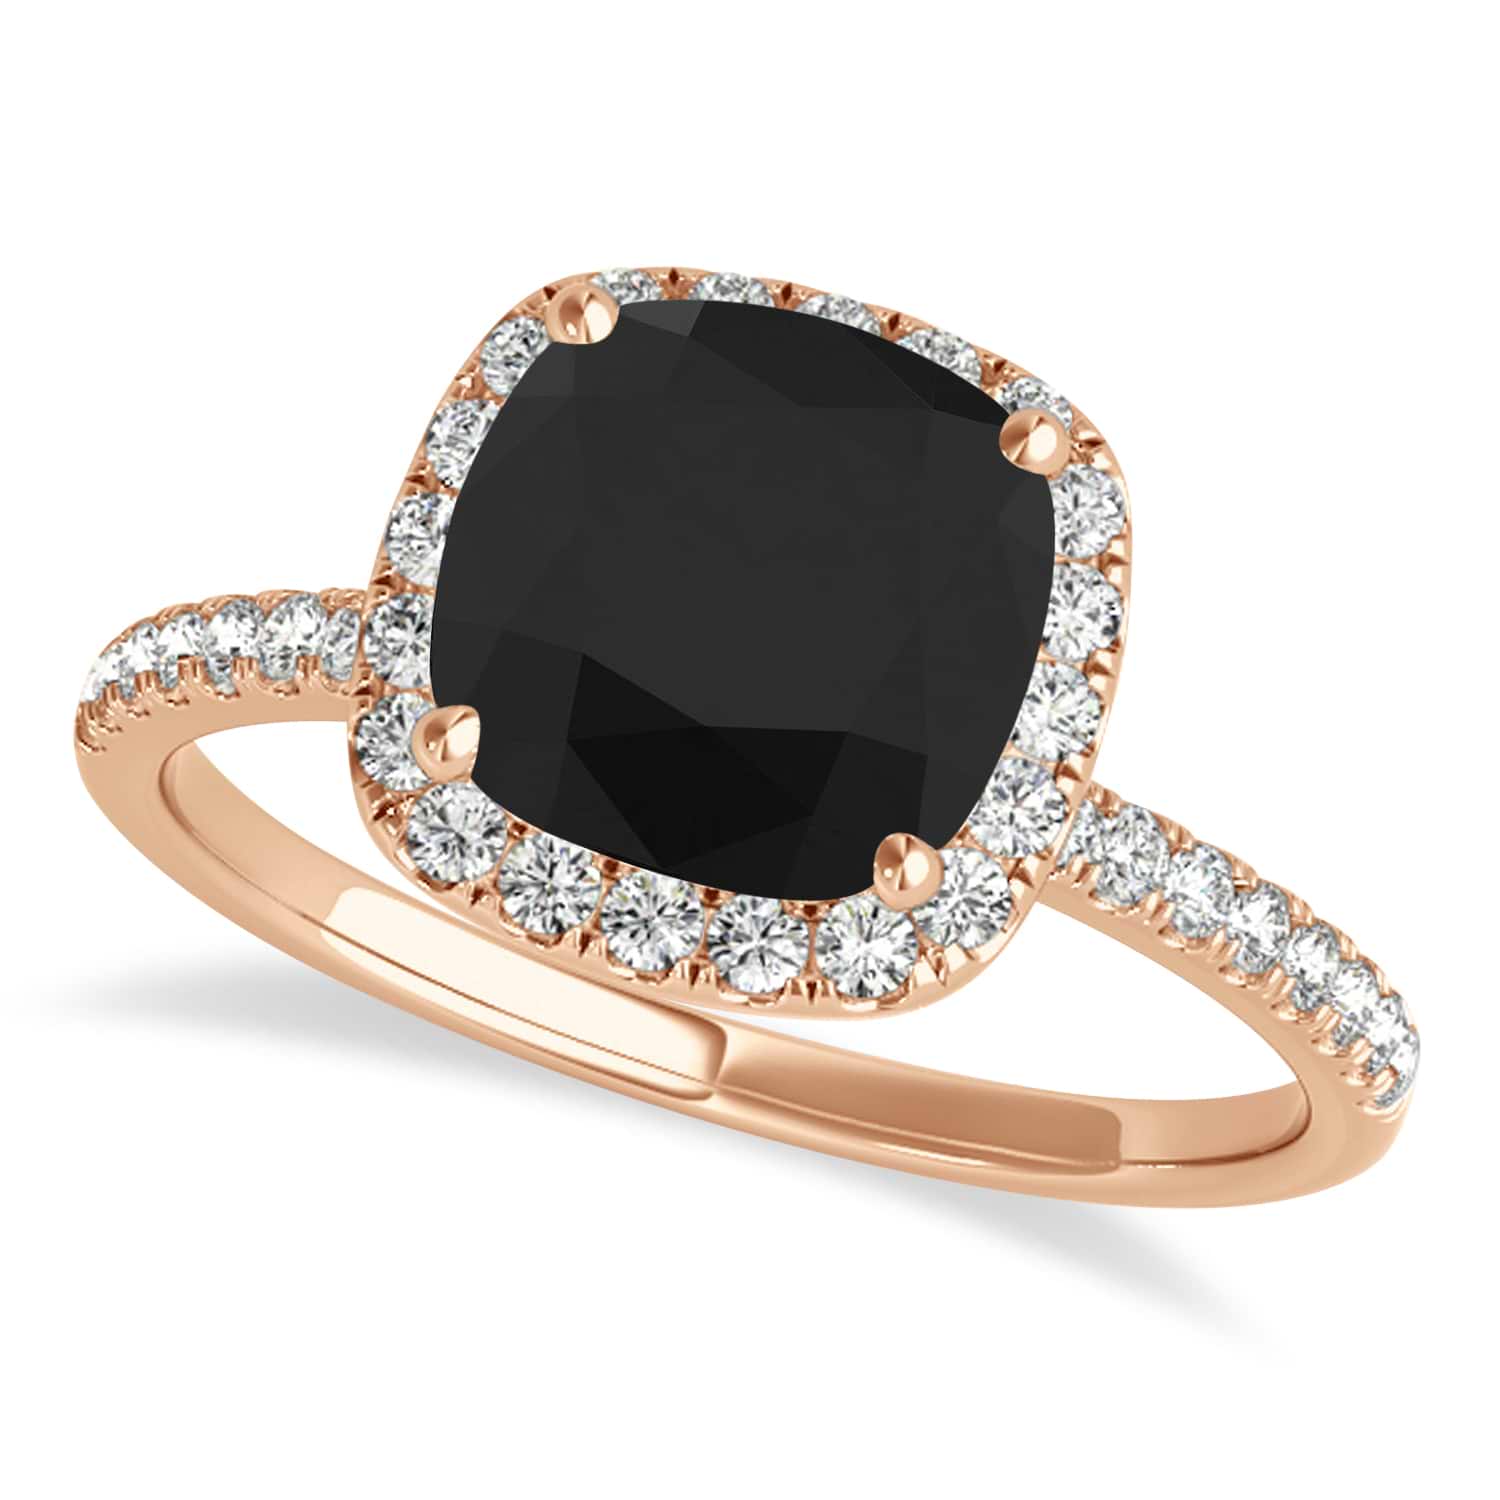 Cushion Black Diamond Halo Engagement Ring French Pave 14k R. Gold 0.70ct